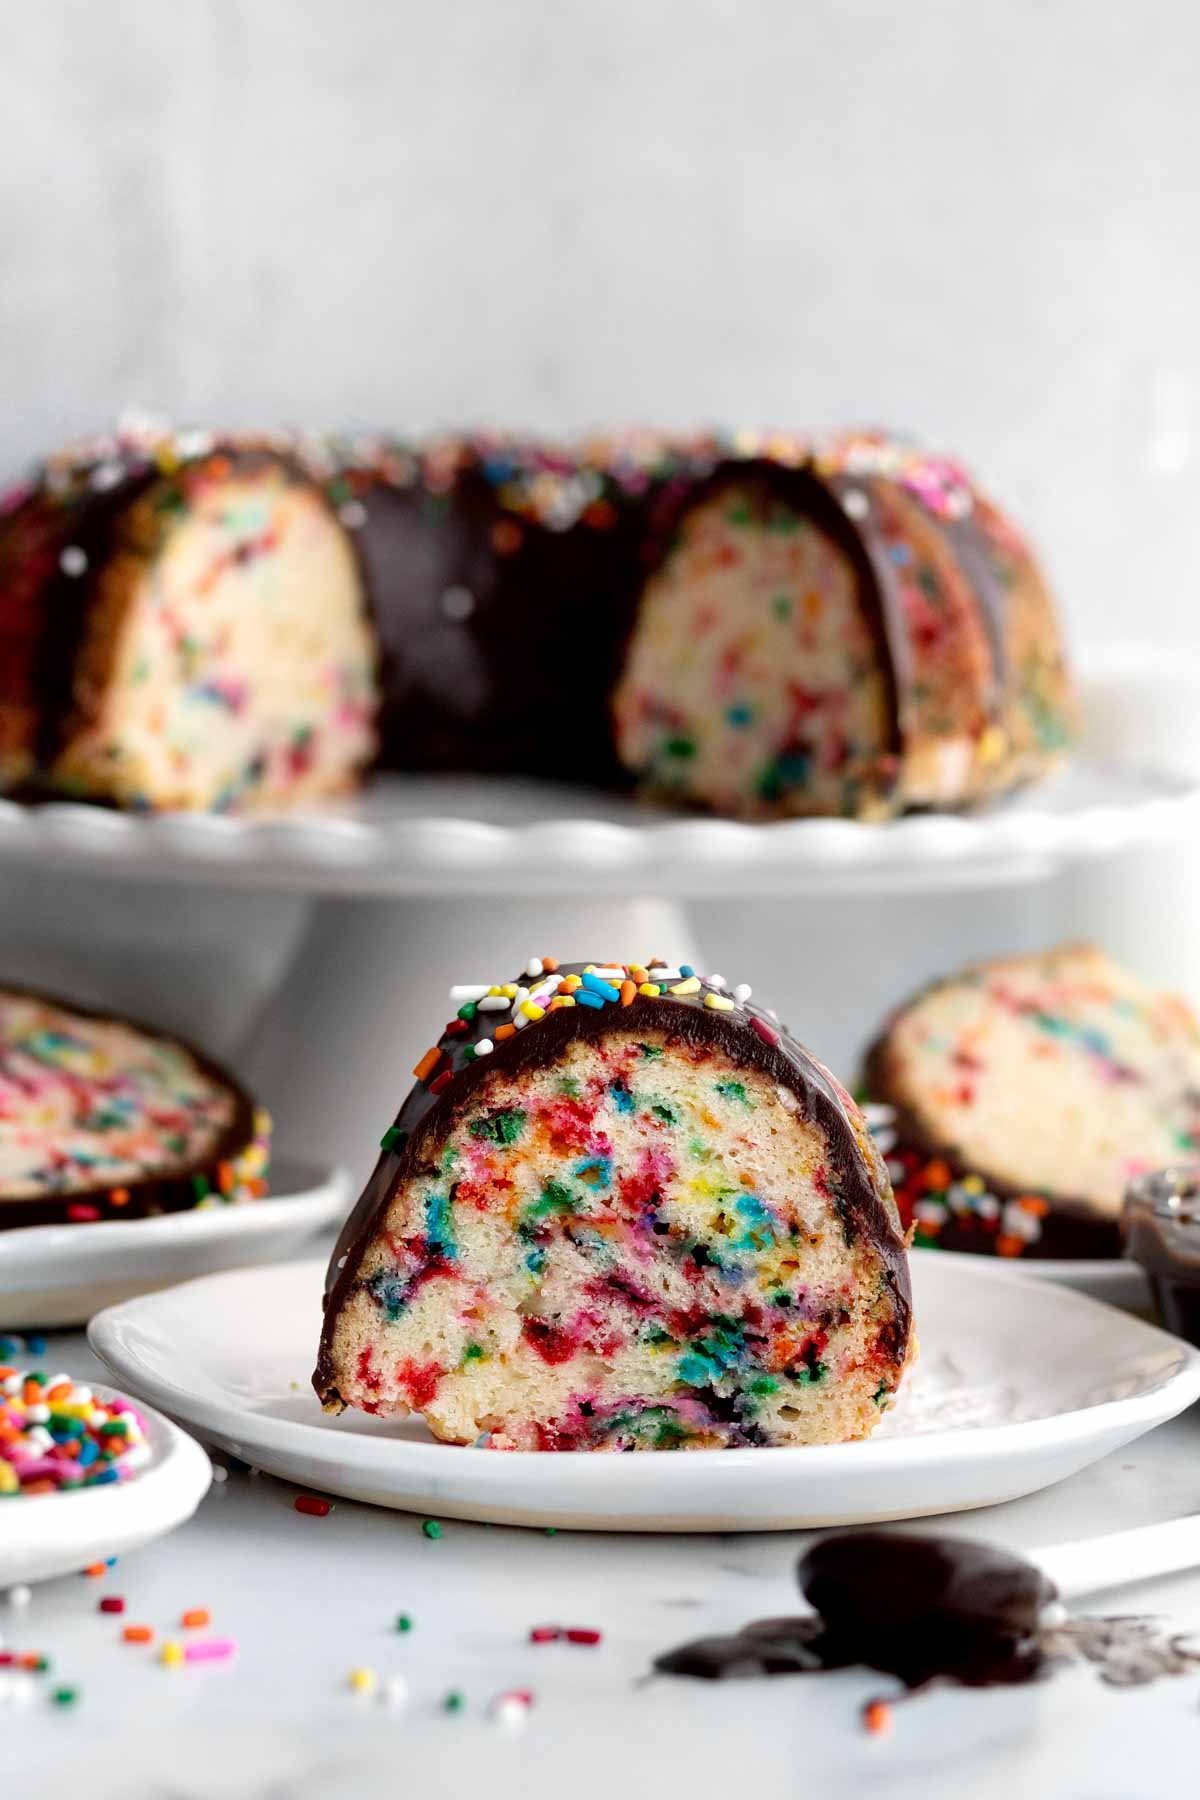 Baked rainbow sprinkles stain the insides of this bundt cake slice.